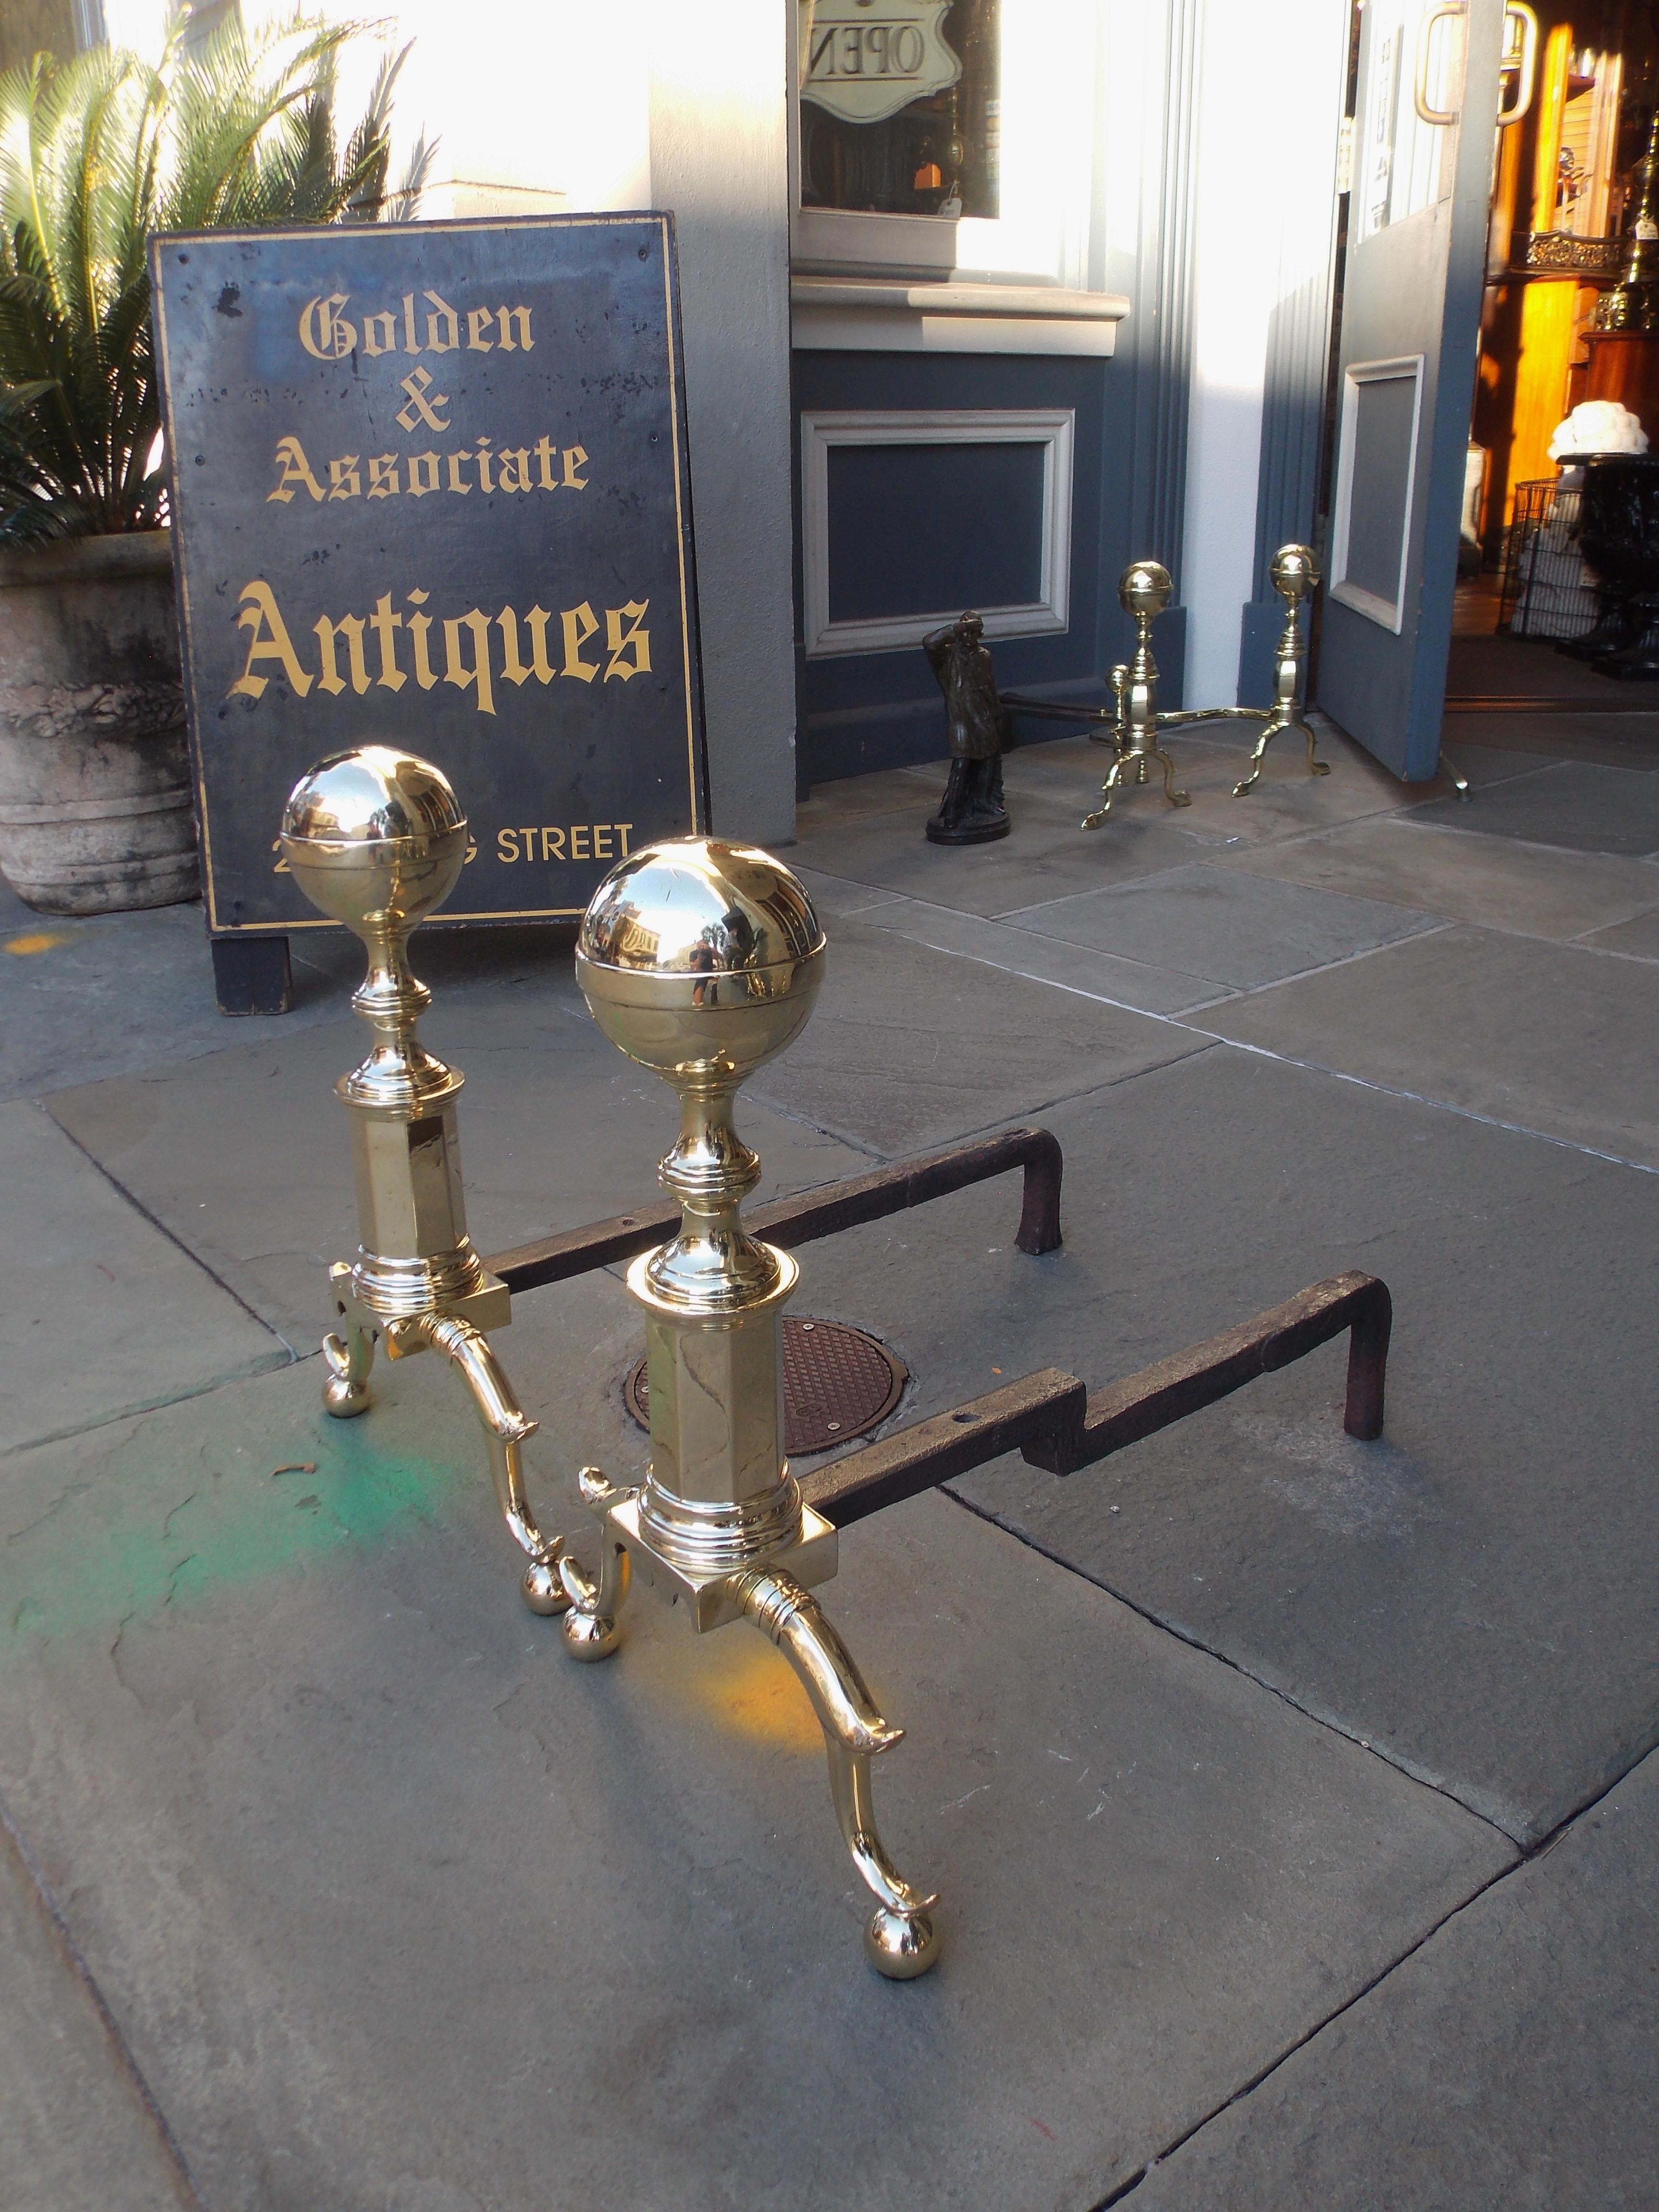 Pair of brass banded flanking ball finial andirons with faceted ringed plinths, scalloped skirts, original rear wrought iron dog legs, double spur banded legs, and resting on ball feet. Boston, Ma. Early 19th century.